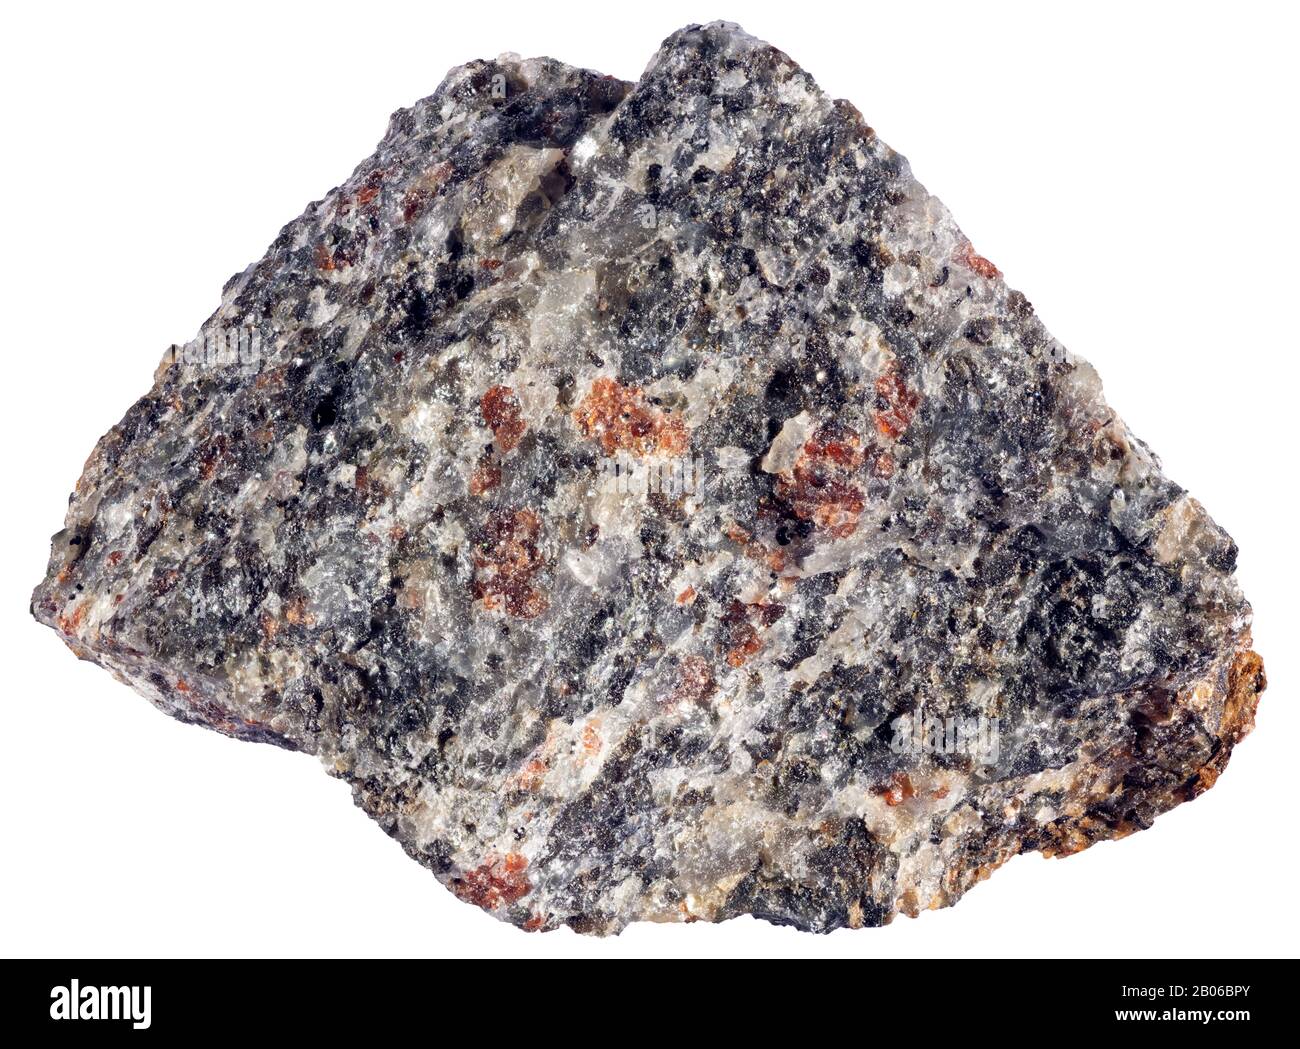 Garnet Gneiss, Non Foliated, Oka, Quebec A coarse-grained gneiss composed mainly of hornblende, plagioclase, and garnet (red). Stock Photo